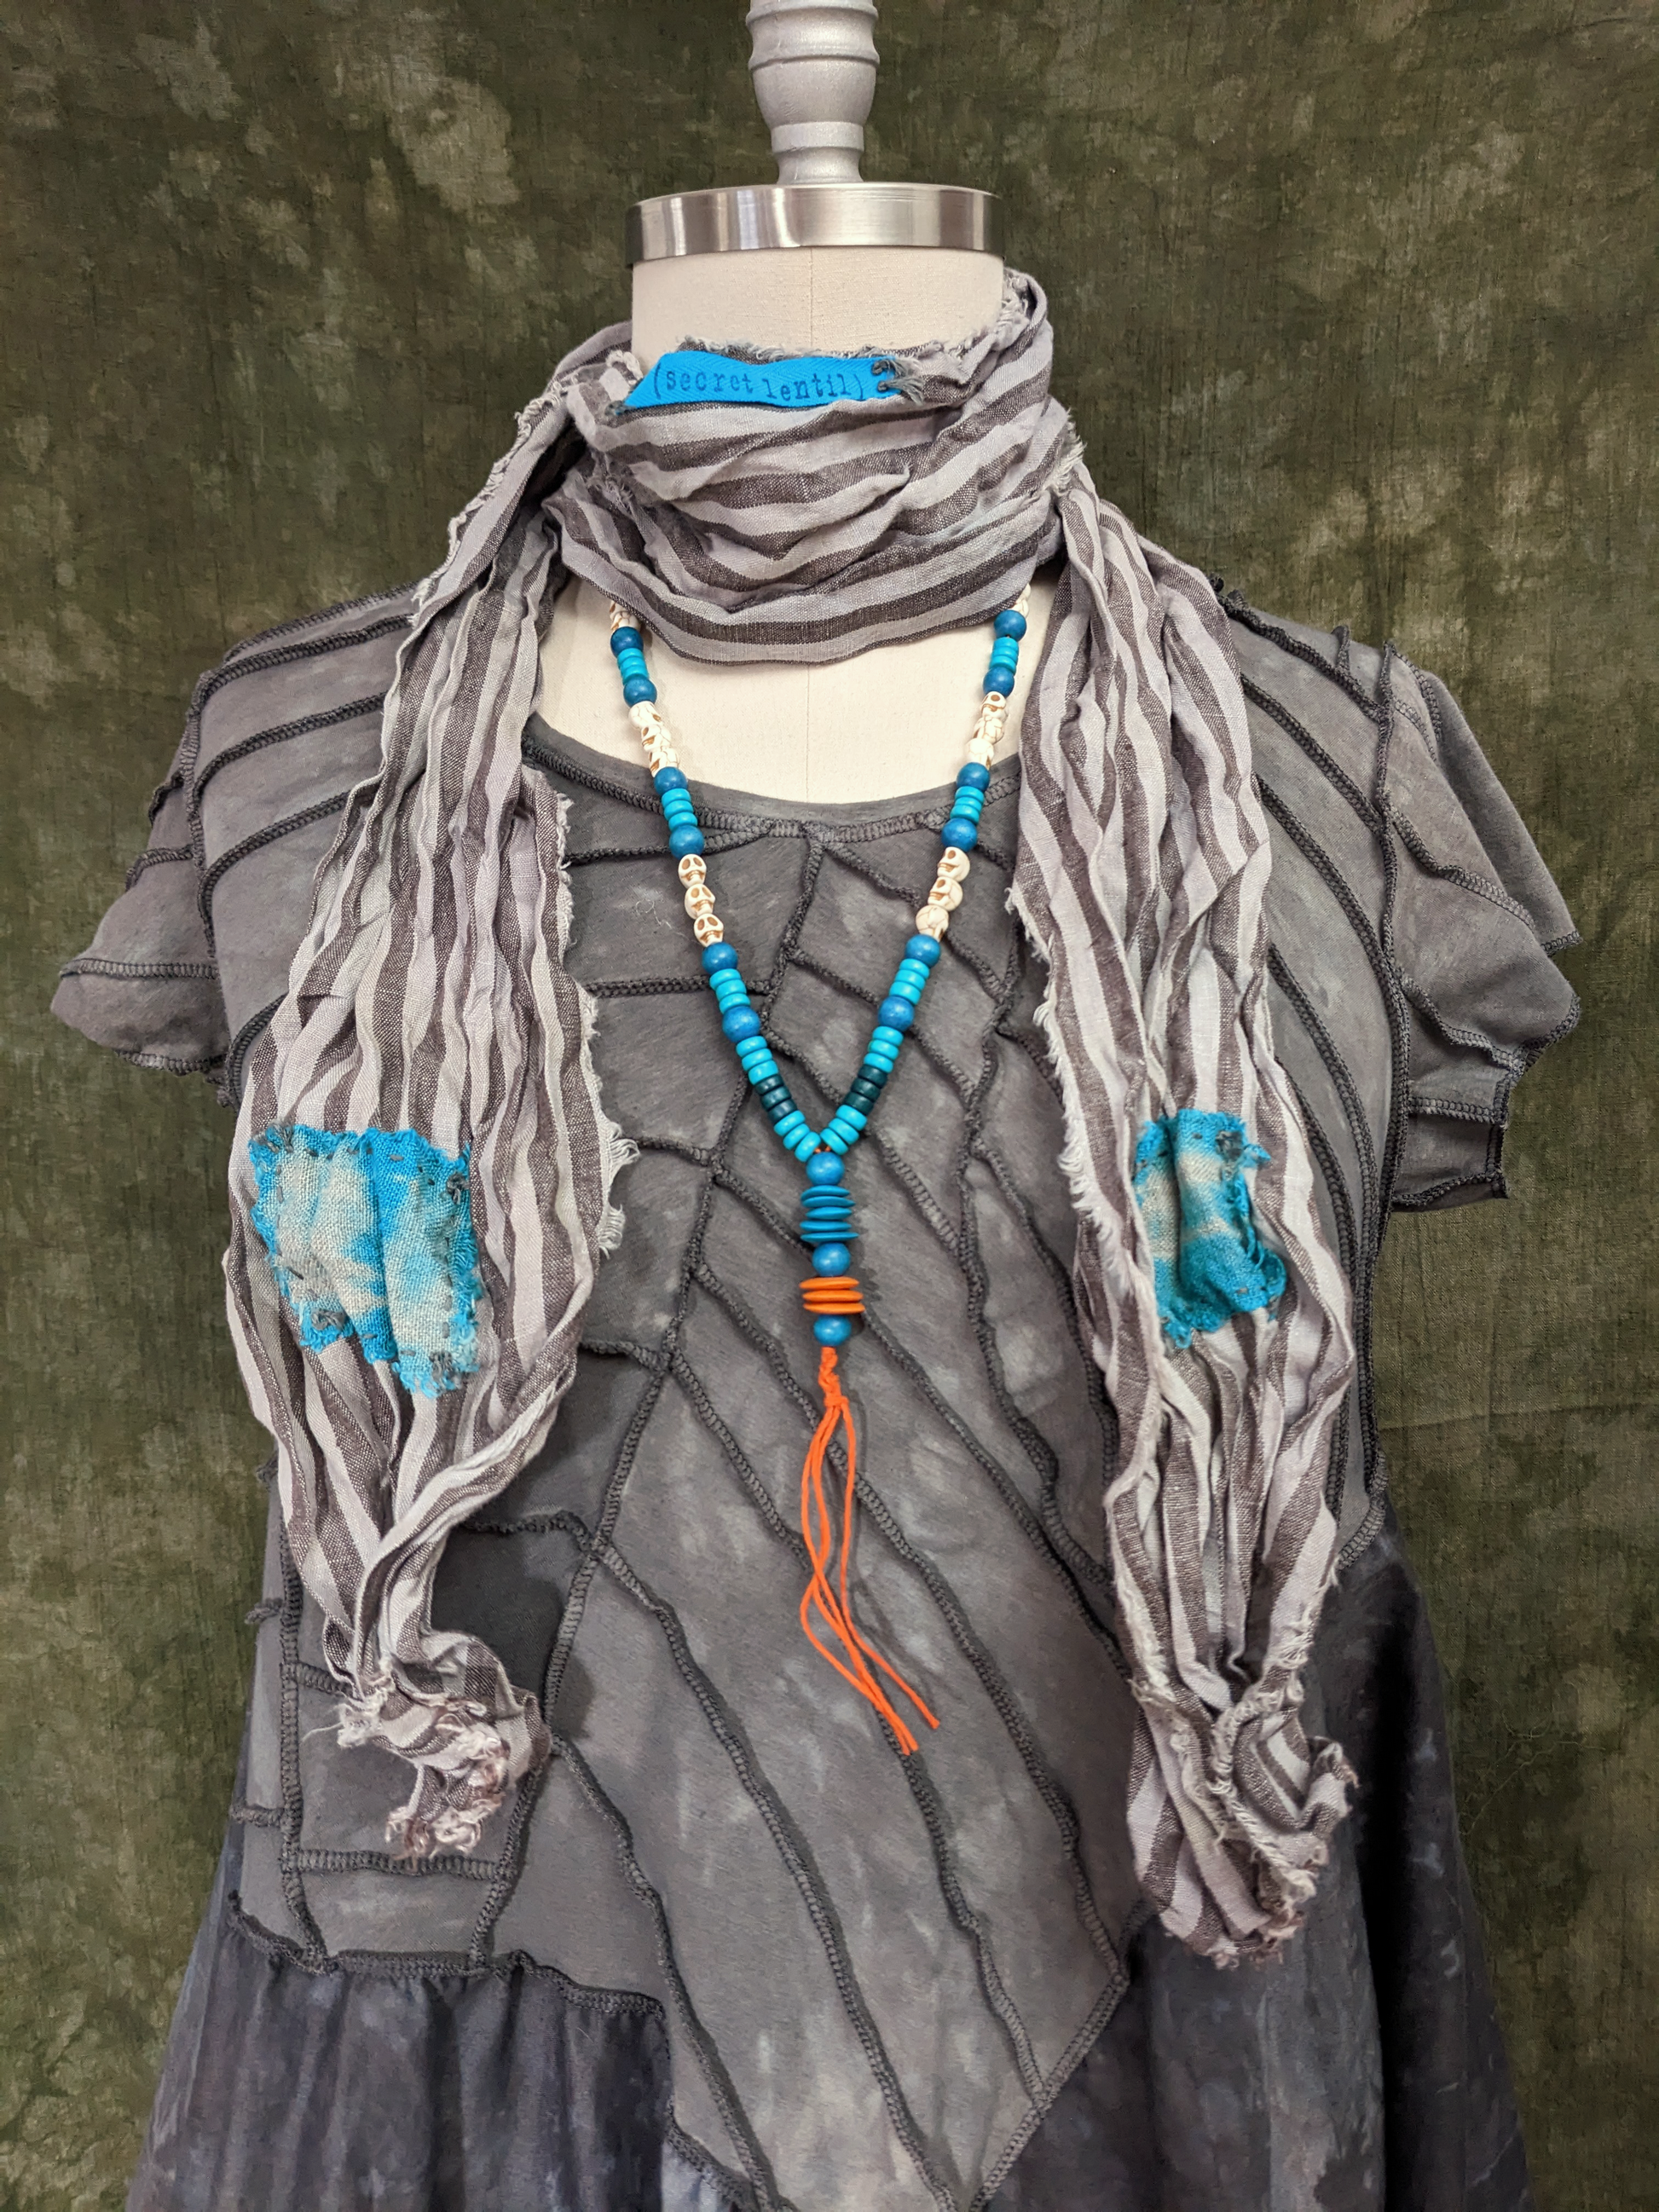 silver-gray and turquoise hand-dyed striped linen scarf with hand-stitched patches